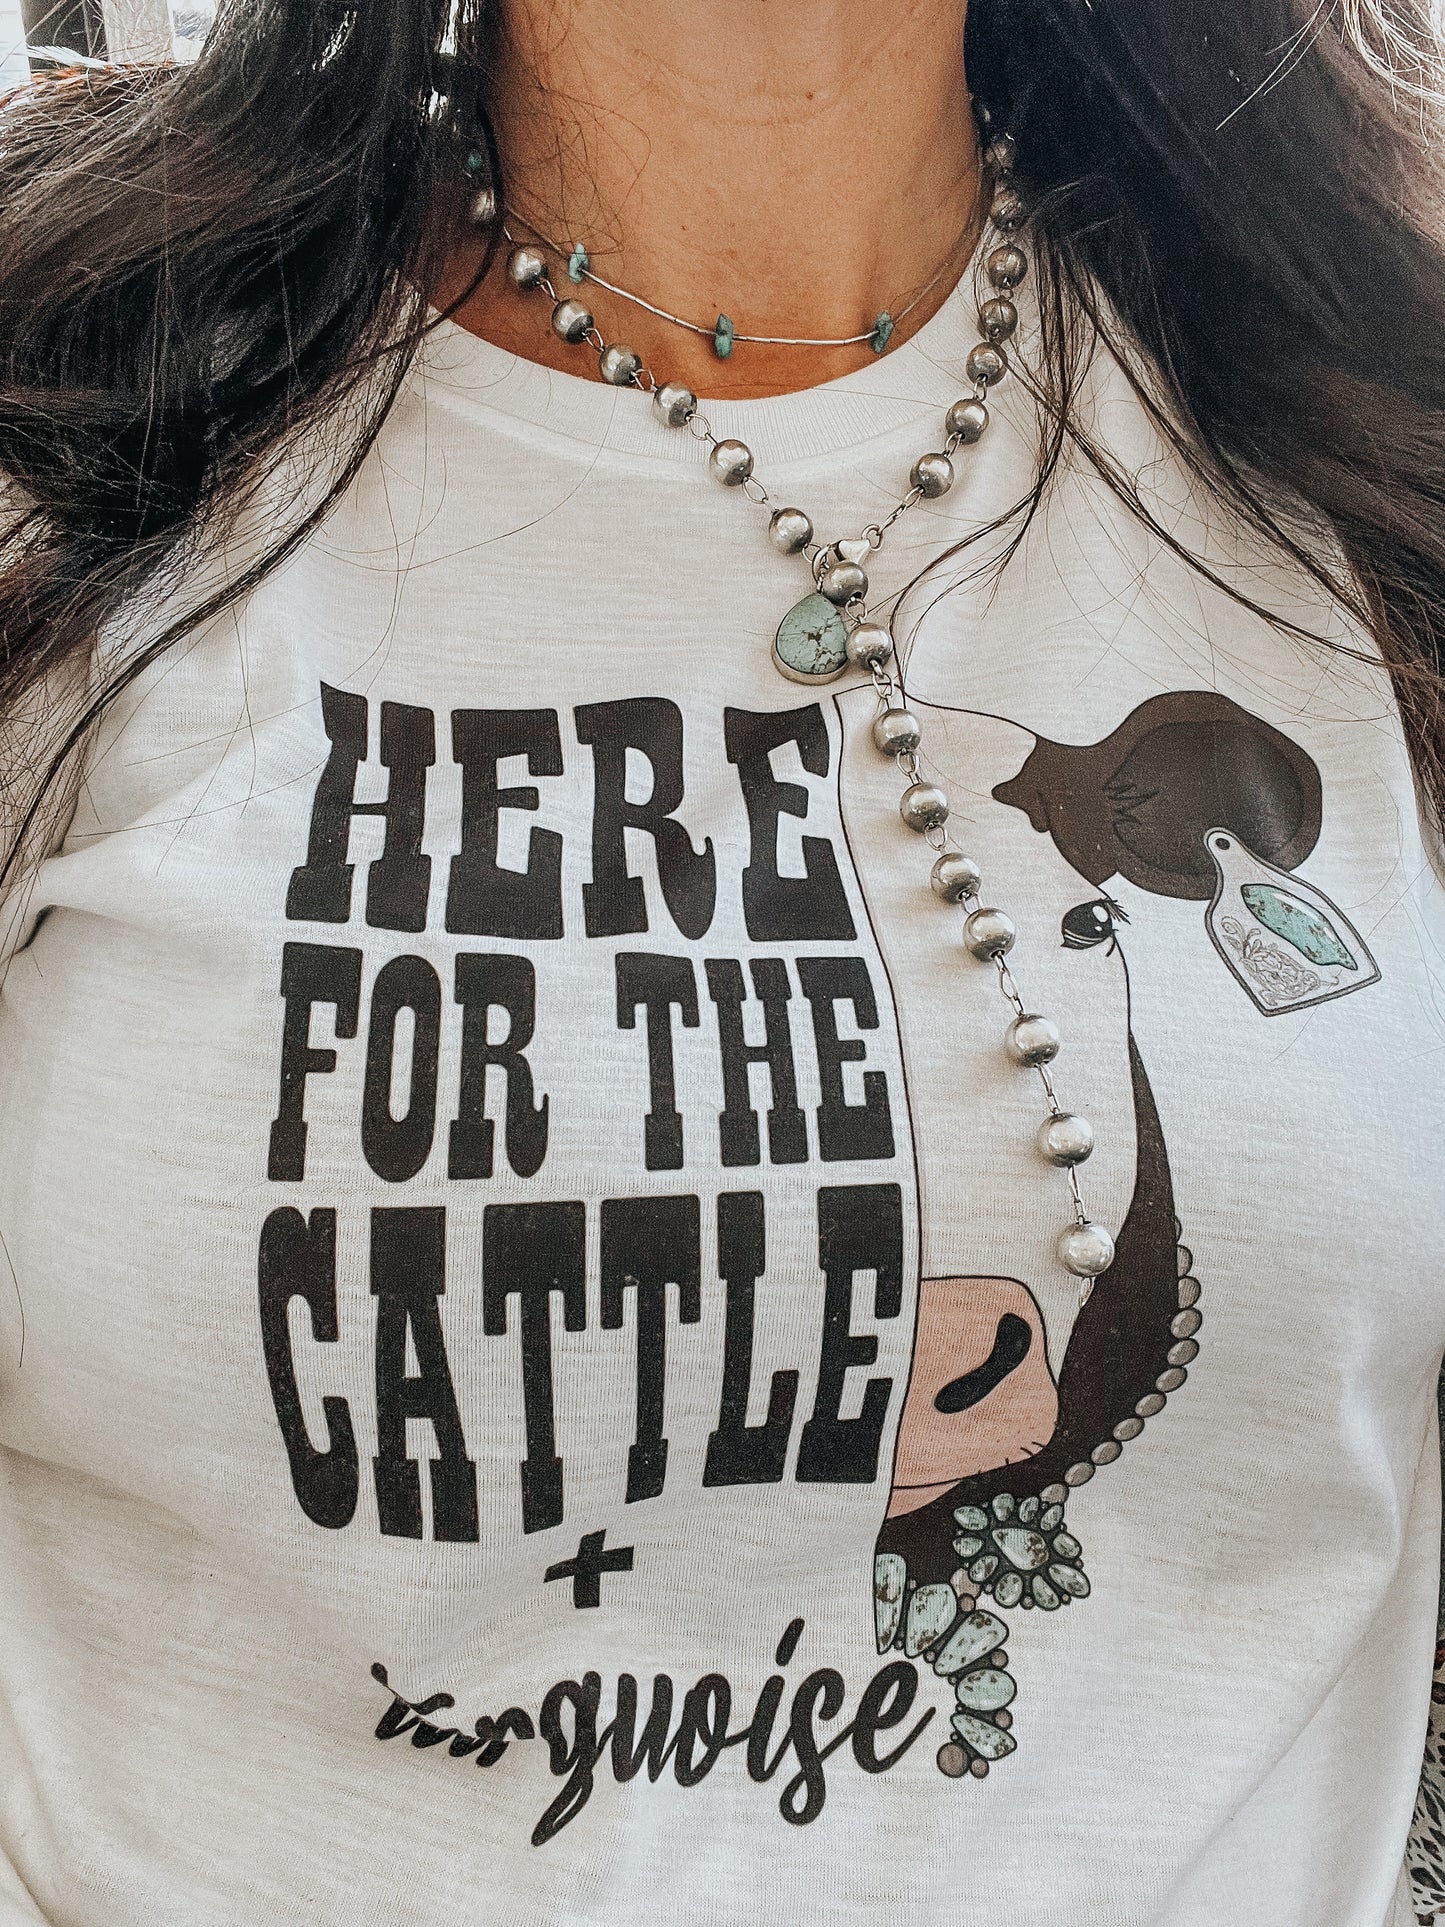 the Here for the Cattle + |Turquoise| ladies